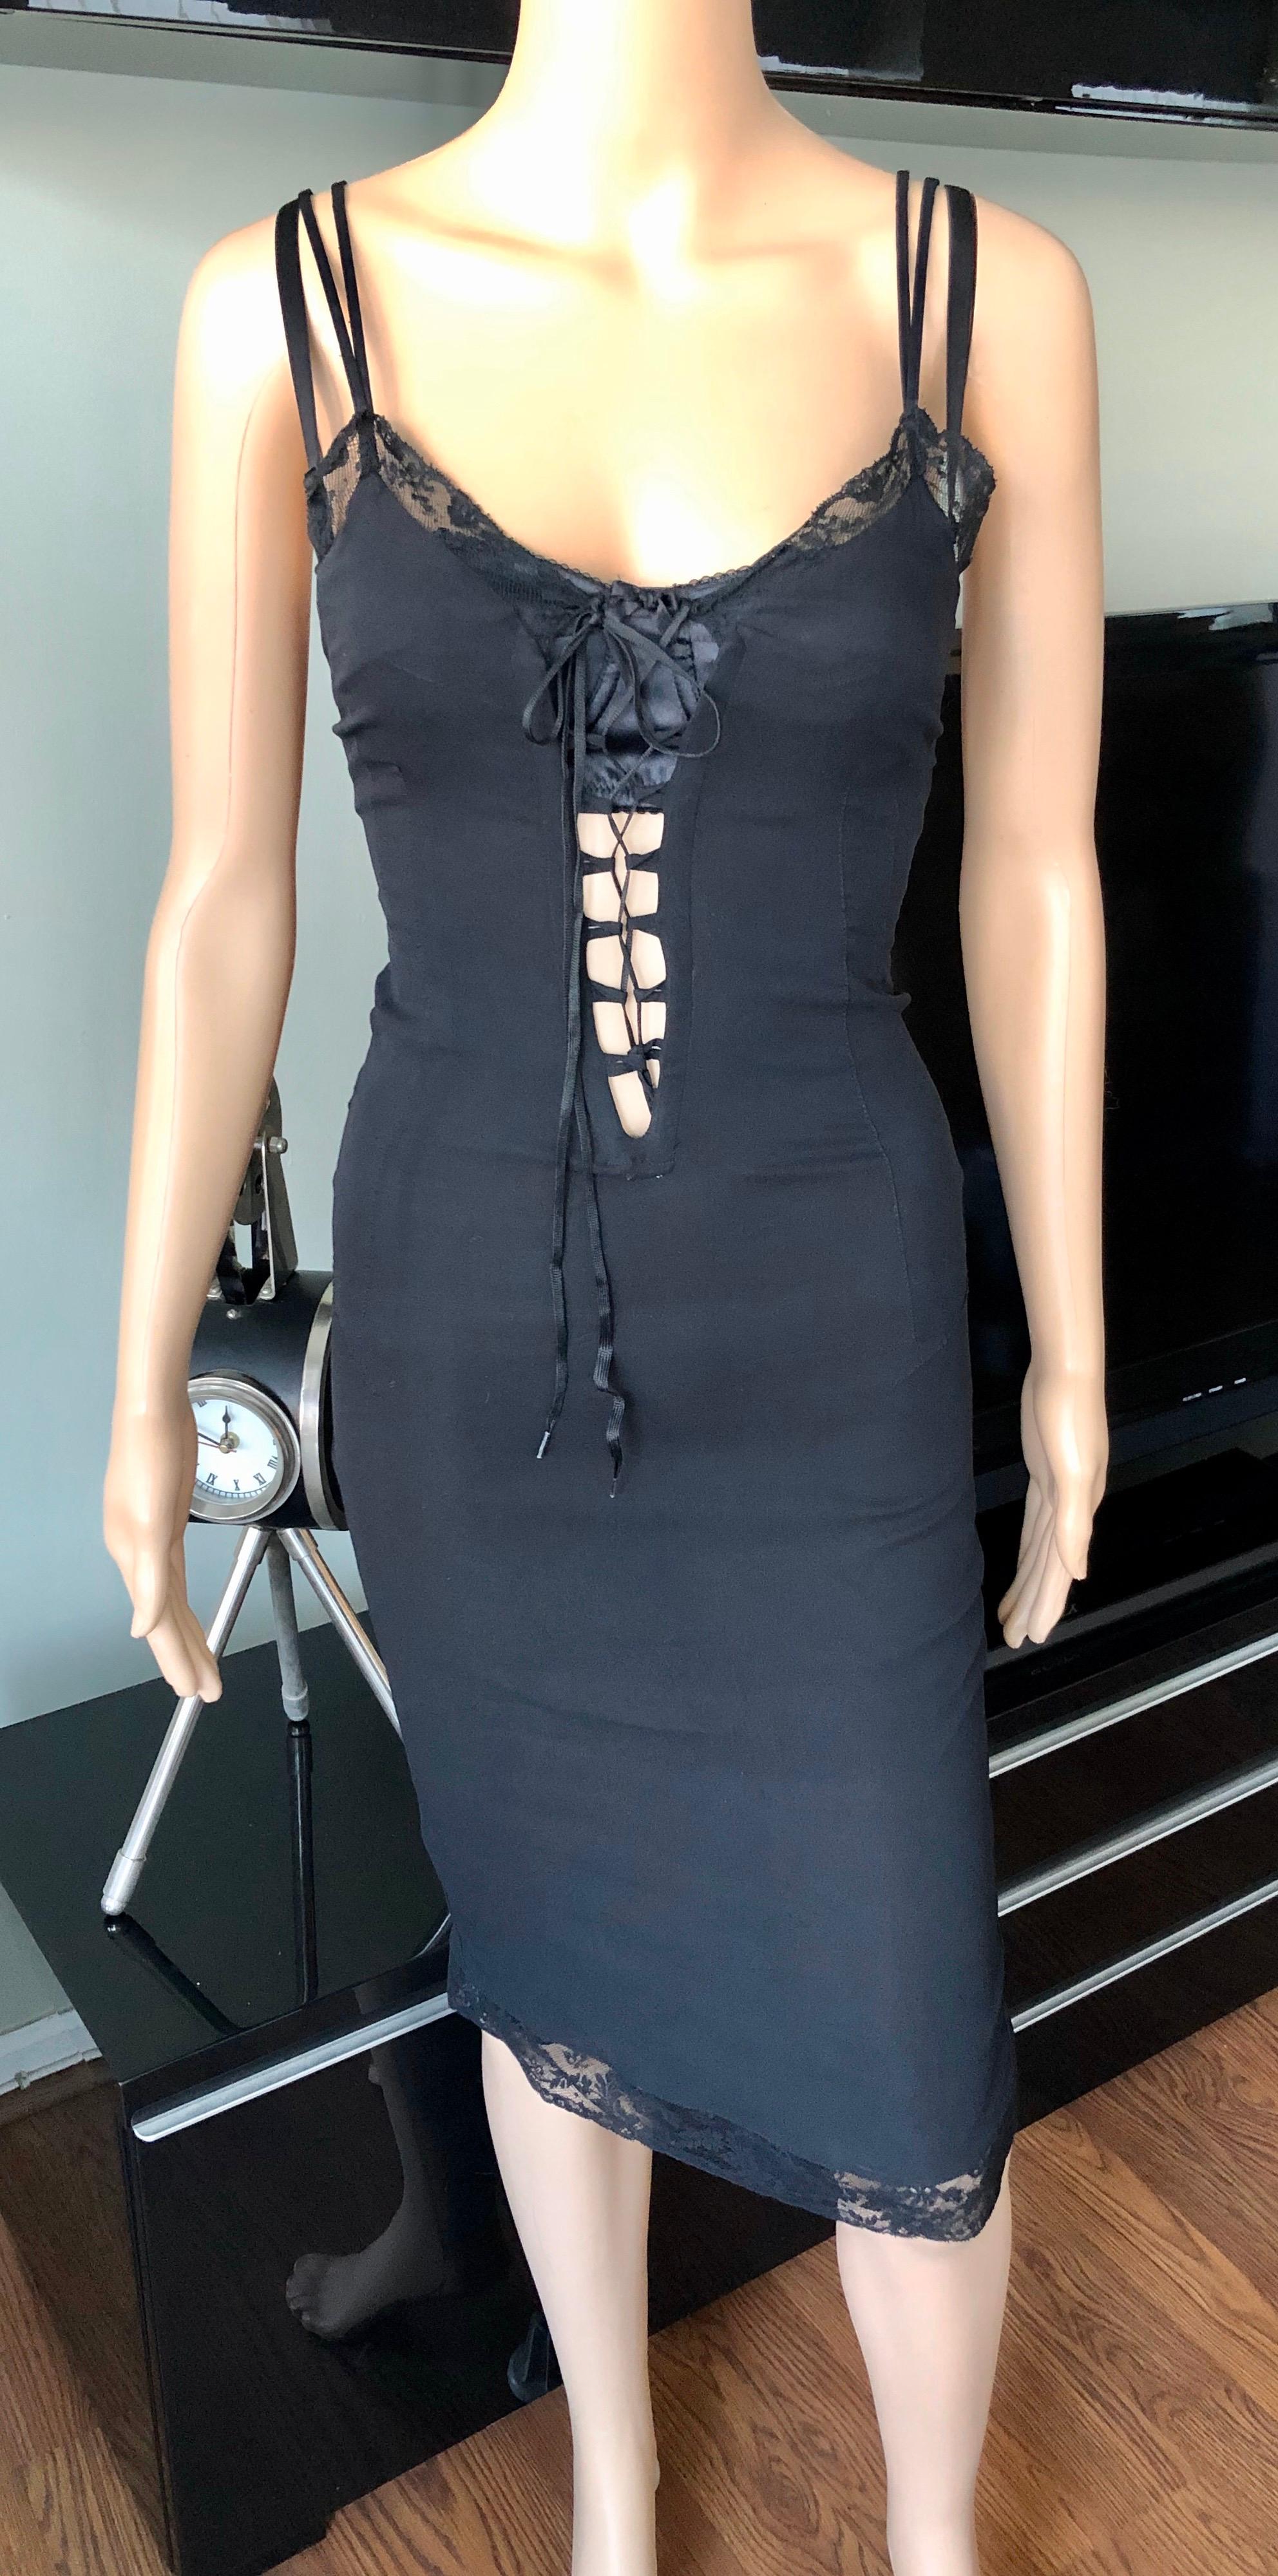 D&G by Dolce & Gabbana c. 2001 Corset Lace Up Bra Black Dress

Please note size tag is missing. Please find the approximate measurements below:
Chest: 22-32